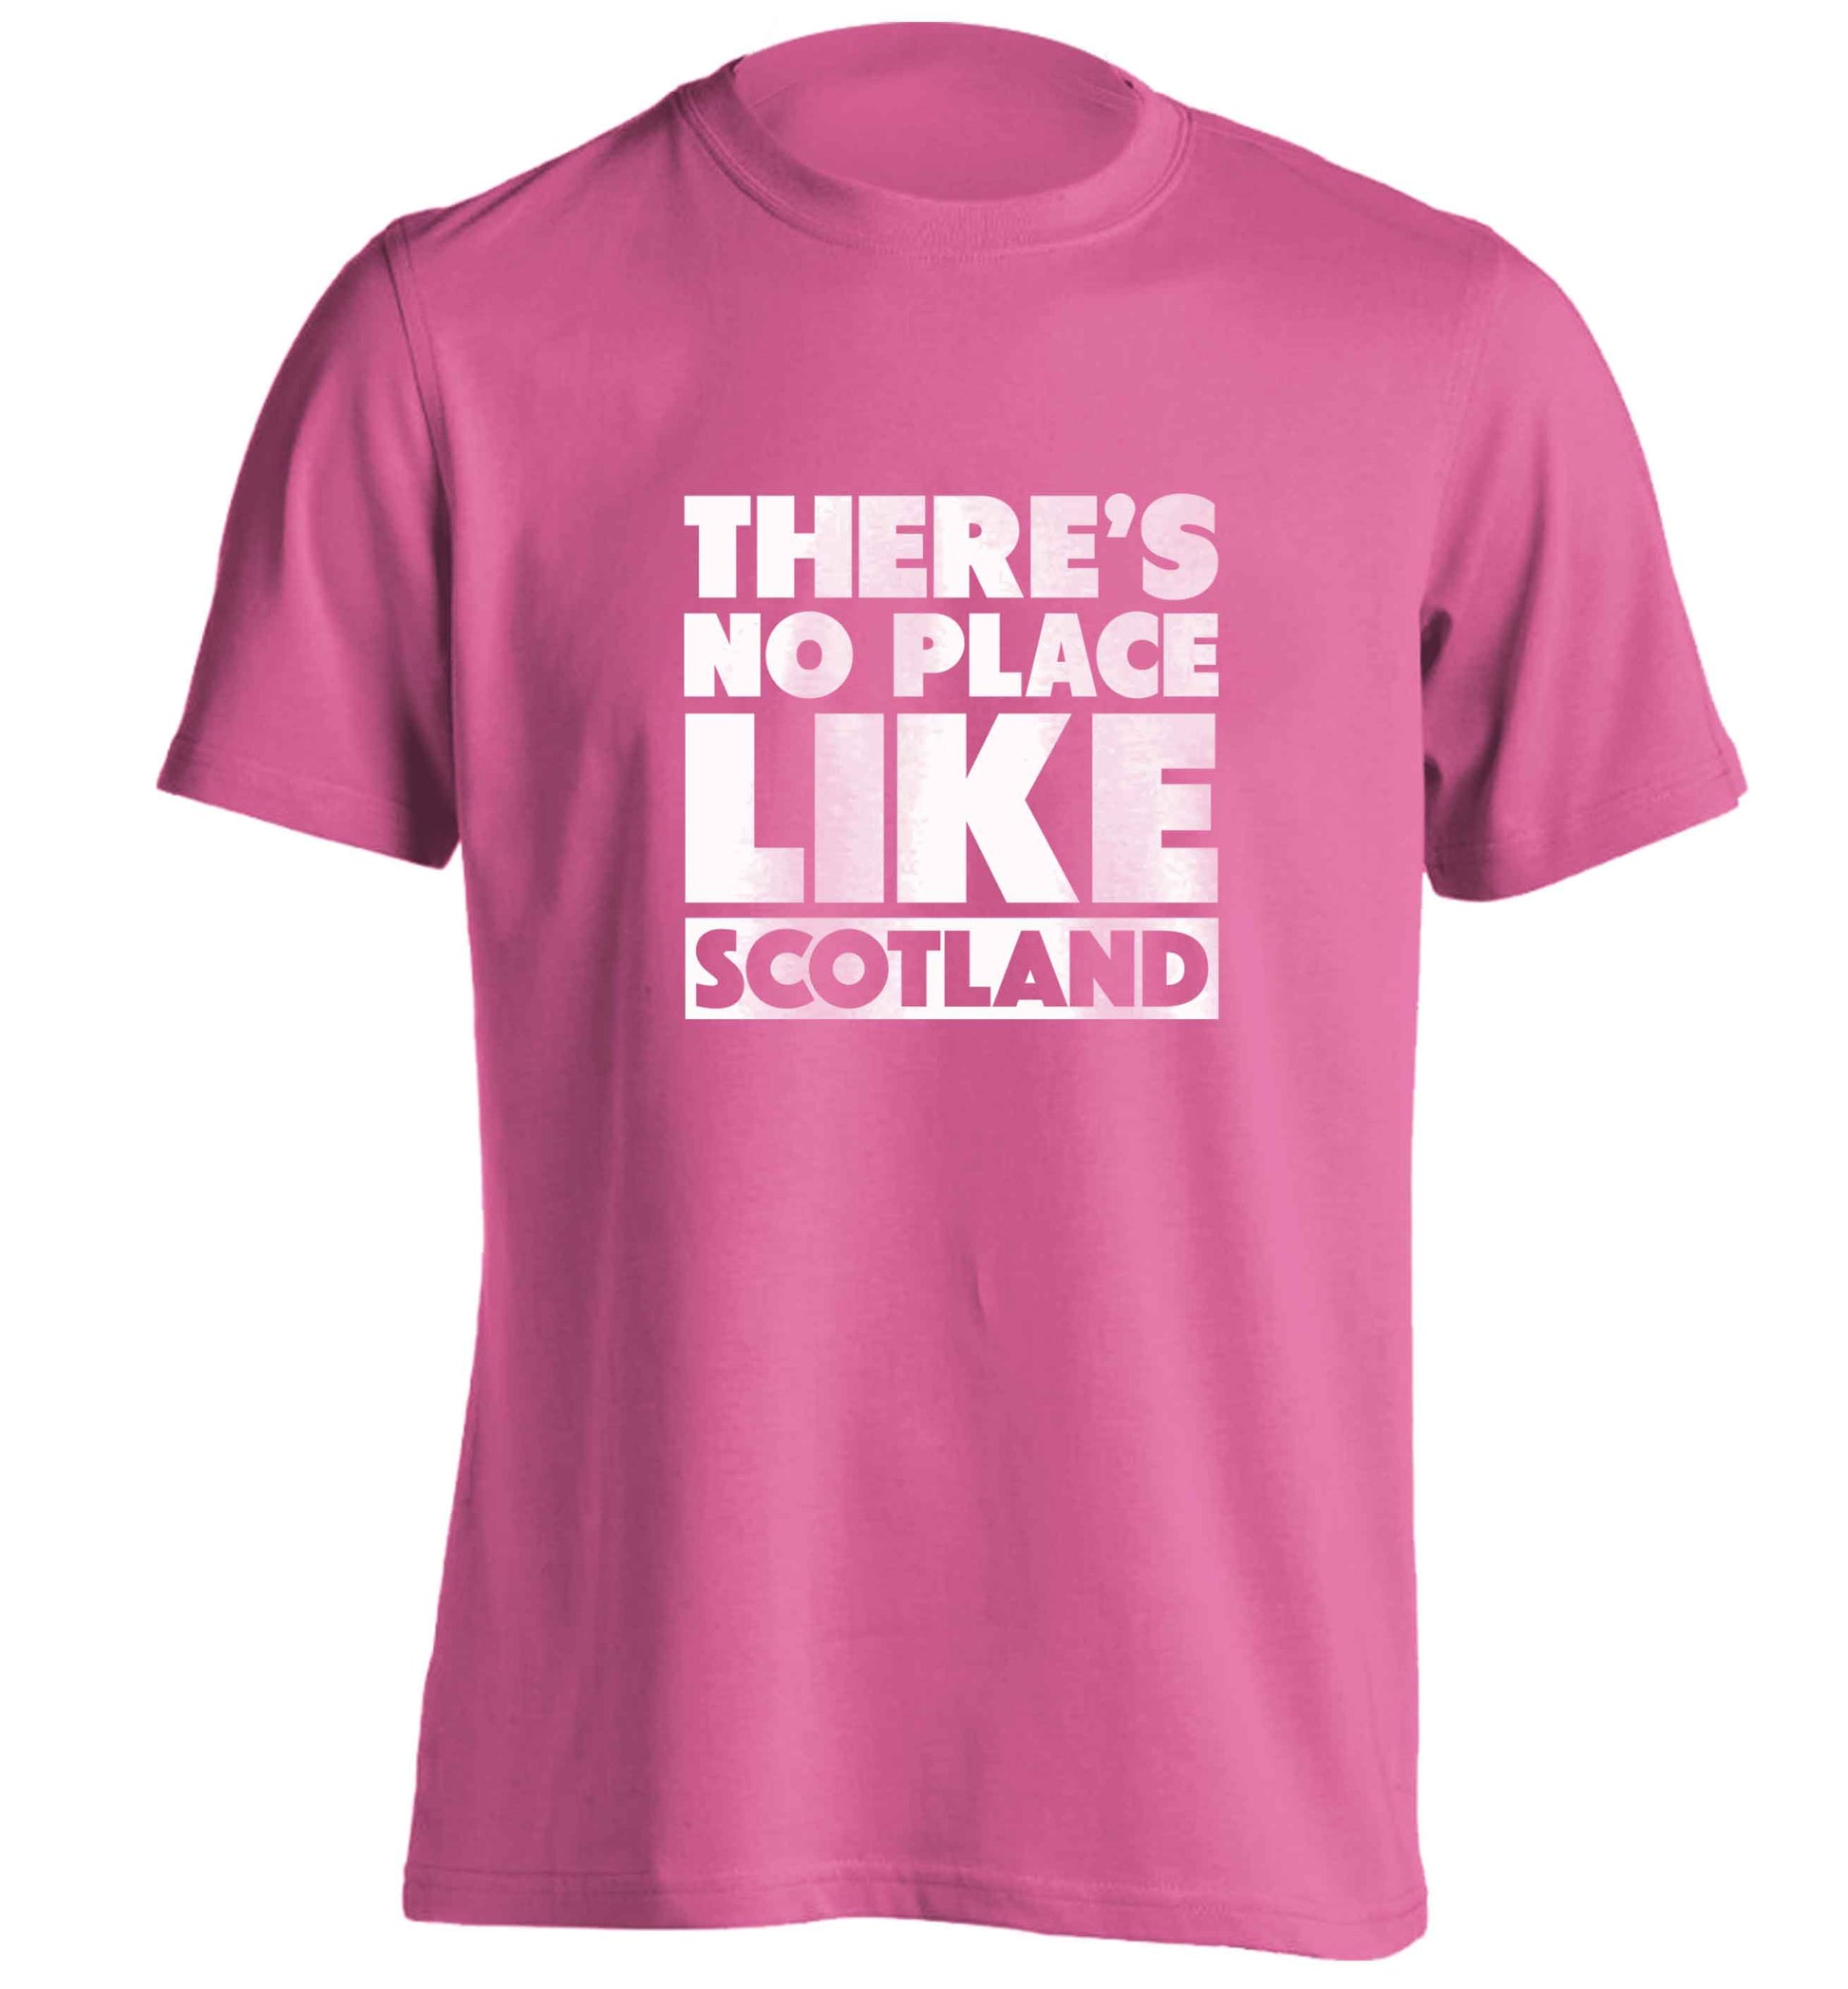 There's no place like Scotland adults unisex pink Tshirt 2XL